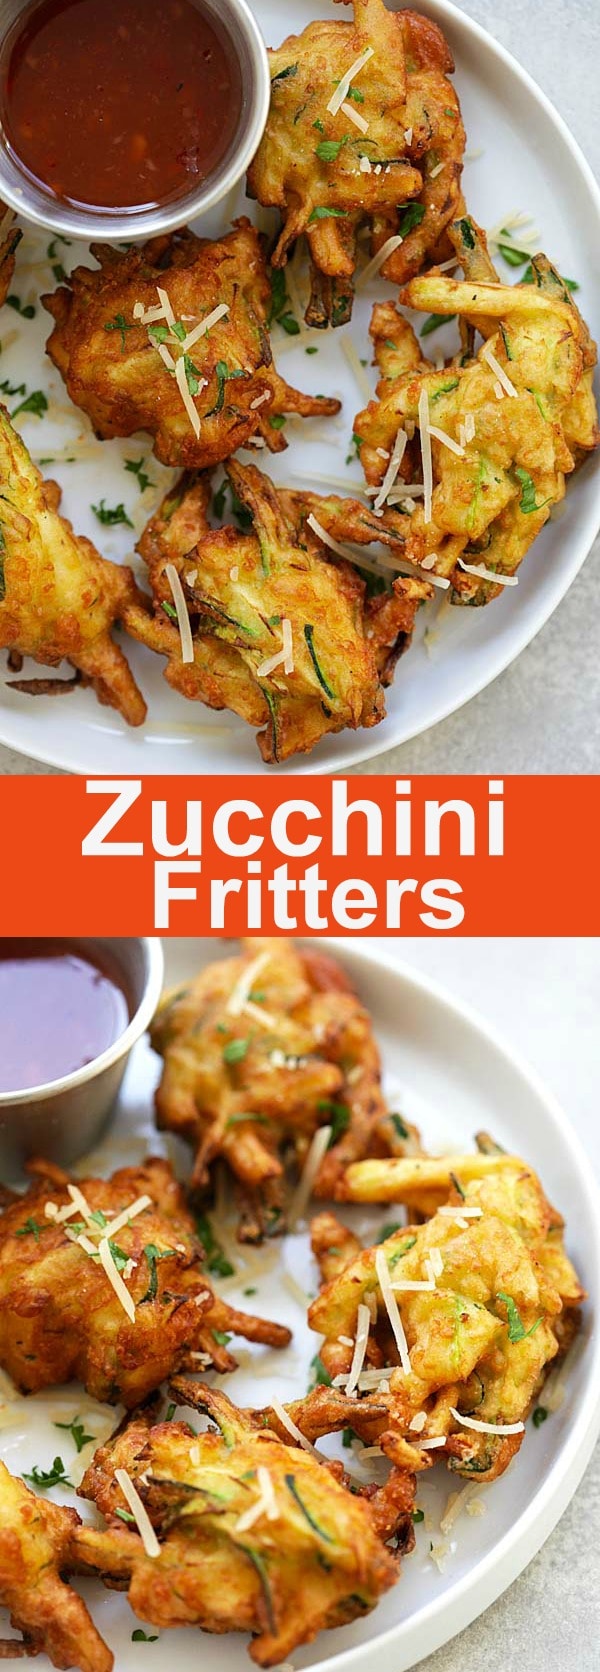 Zucchini Fritters - the easiest and most delicious zucchini fritters recipe you'll find online. Crispy and loaded with zucchini, so good | rasamalaysia.com